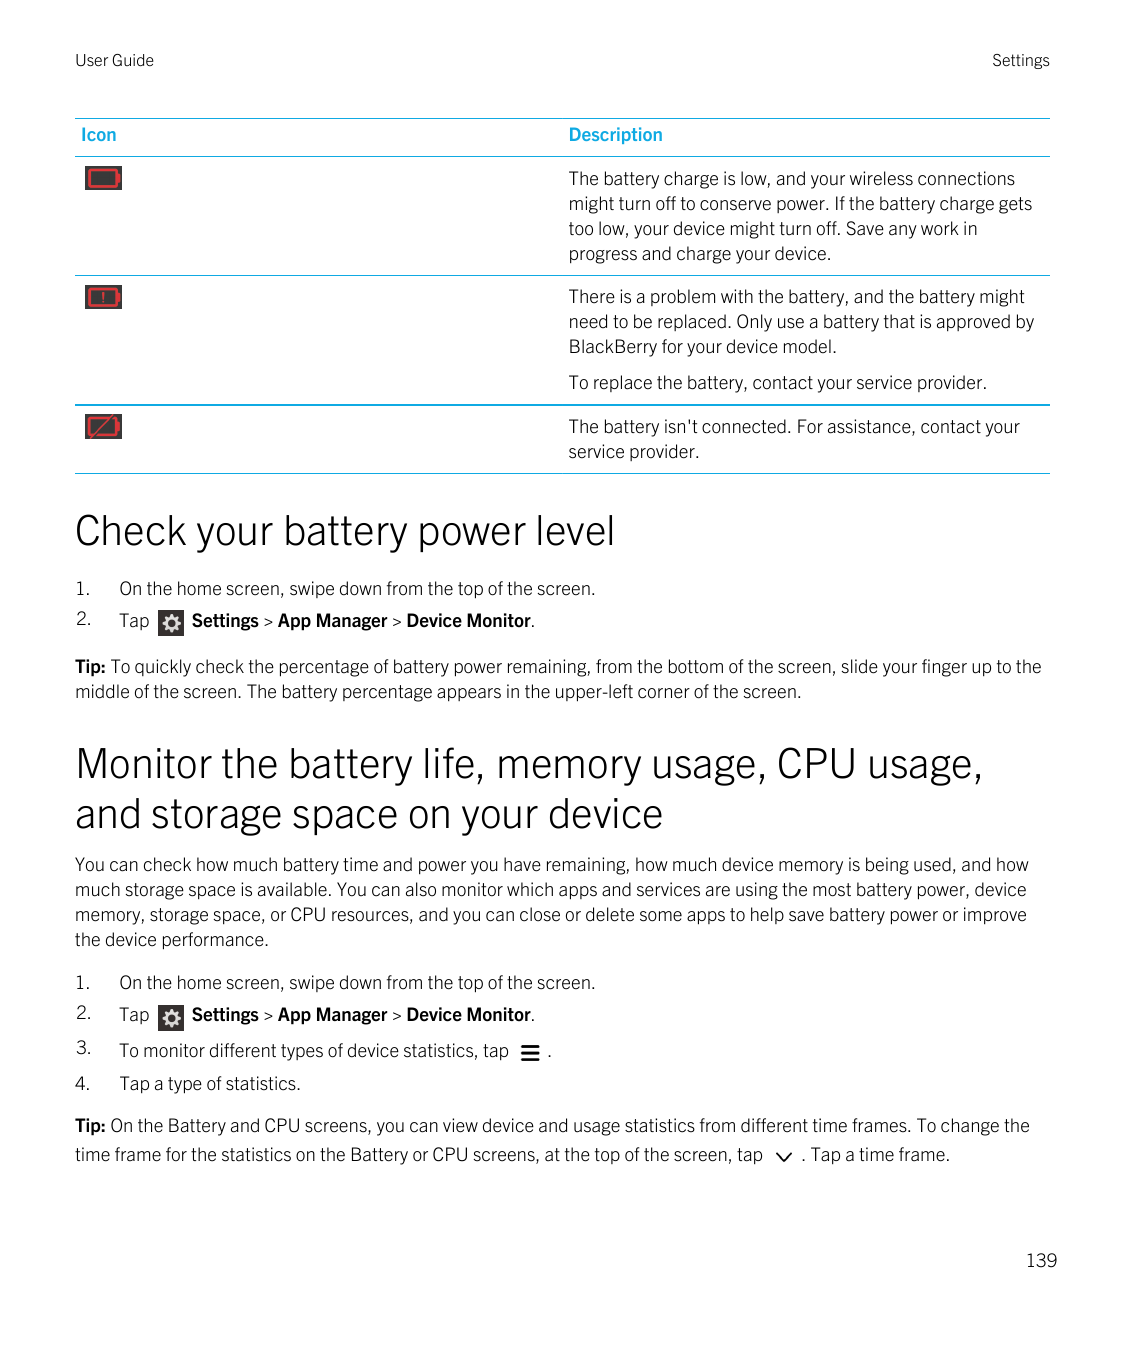 User GuideSettingsIconDescriptionThe battery charge is low, and your wireless connectionsmight turn off to conserve power. If th